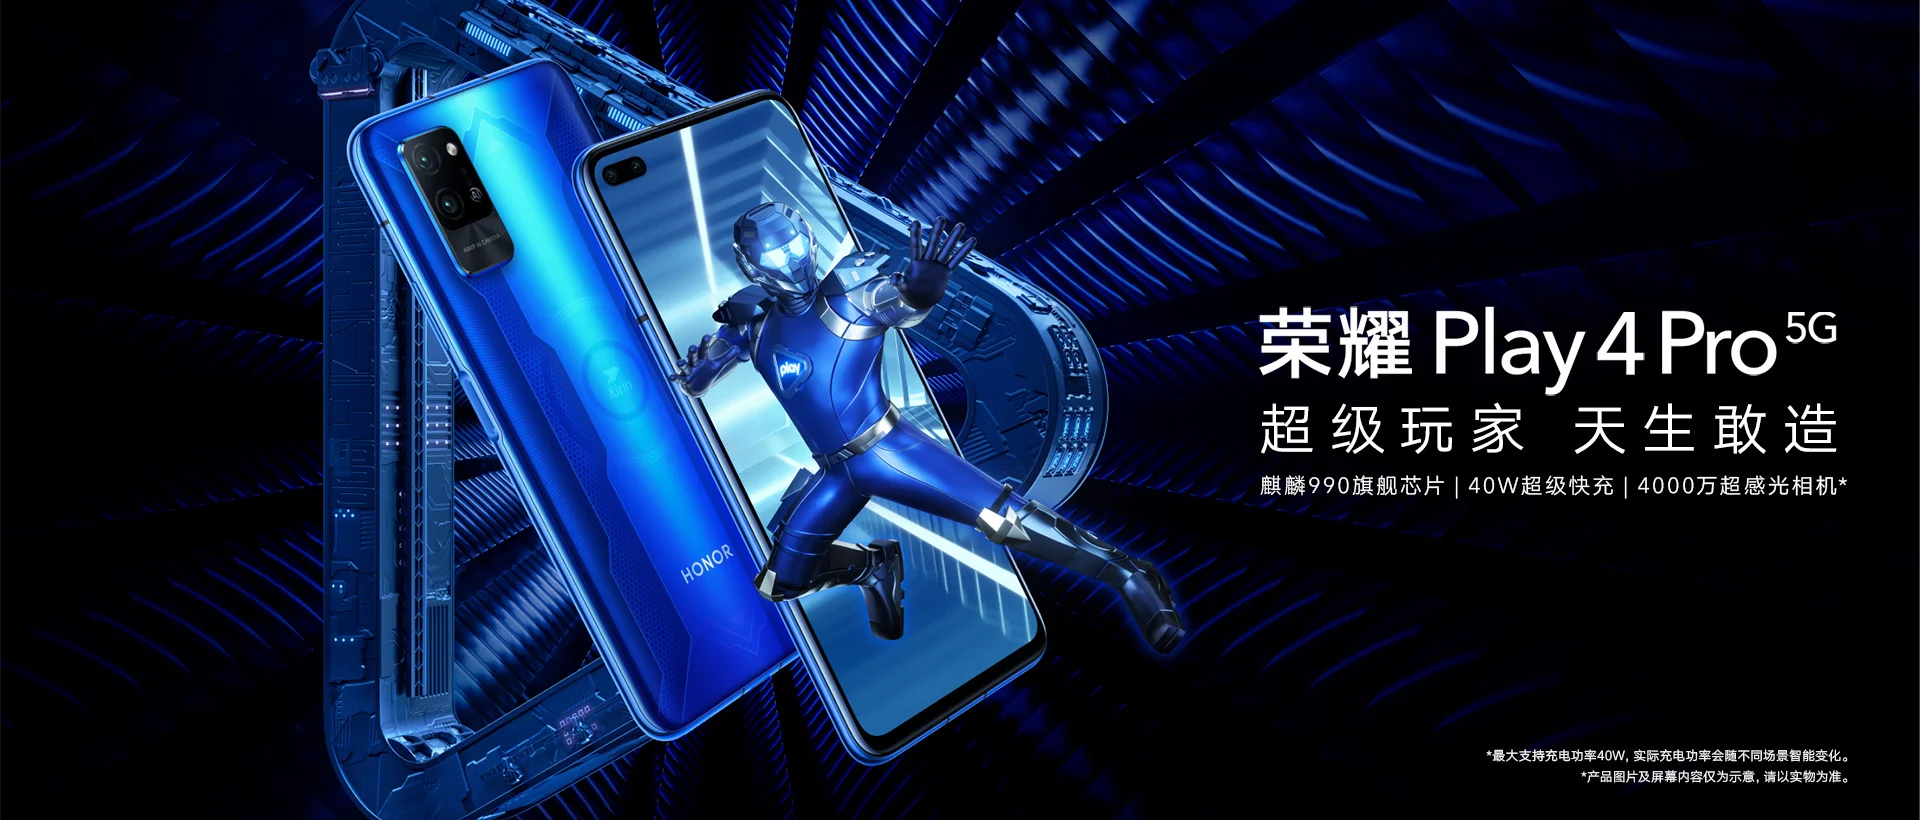 HONOR Play4 Pro 5G